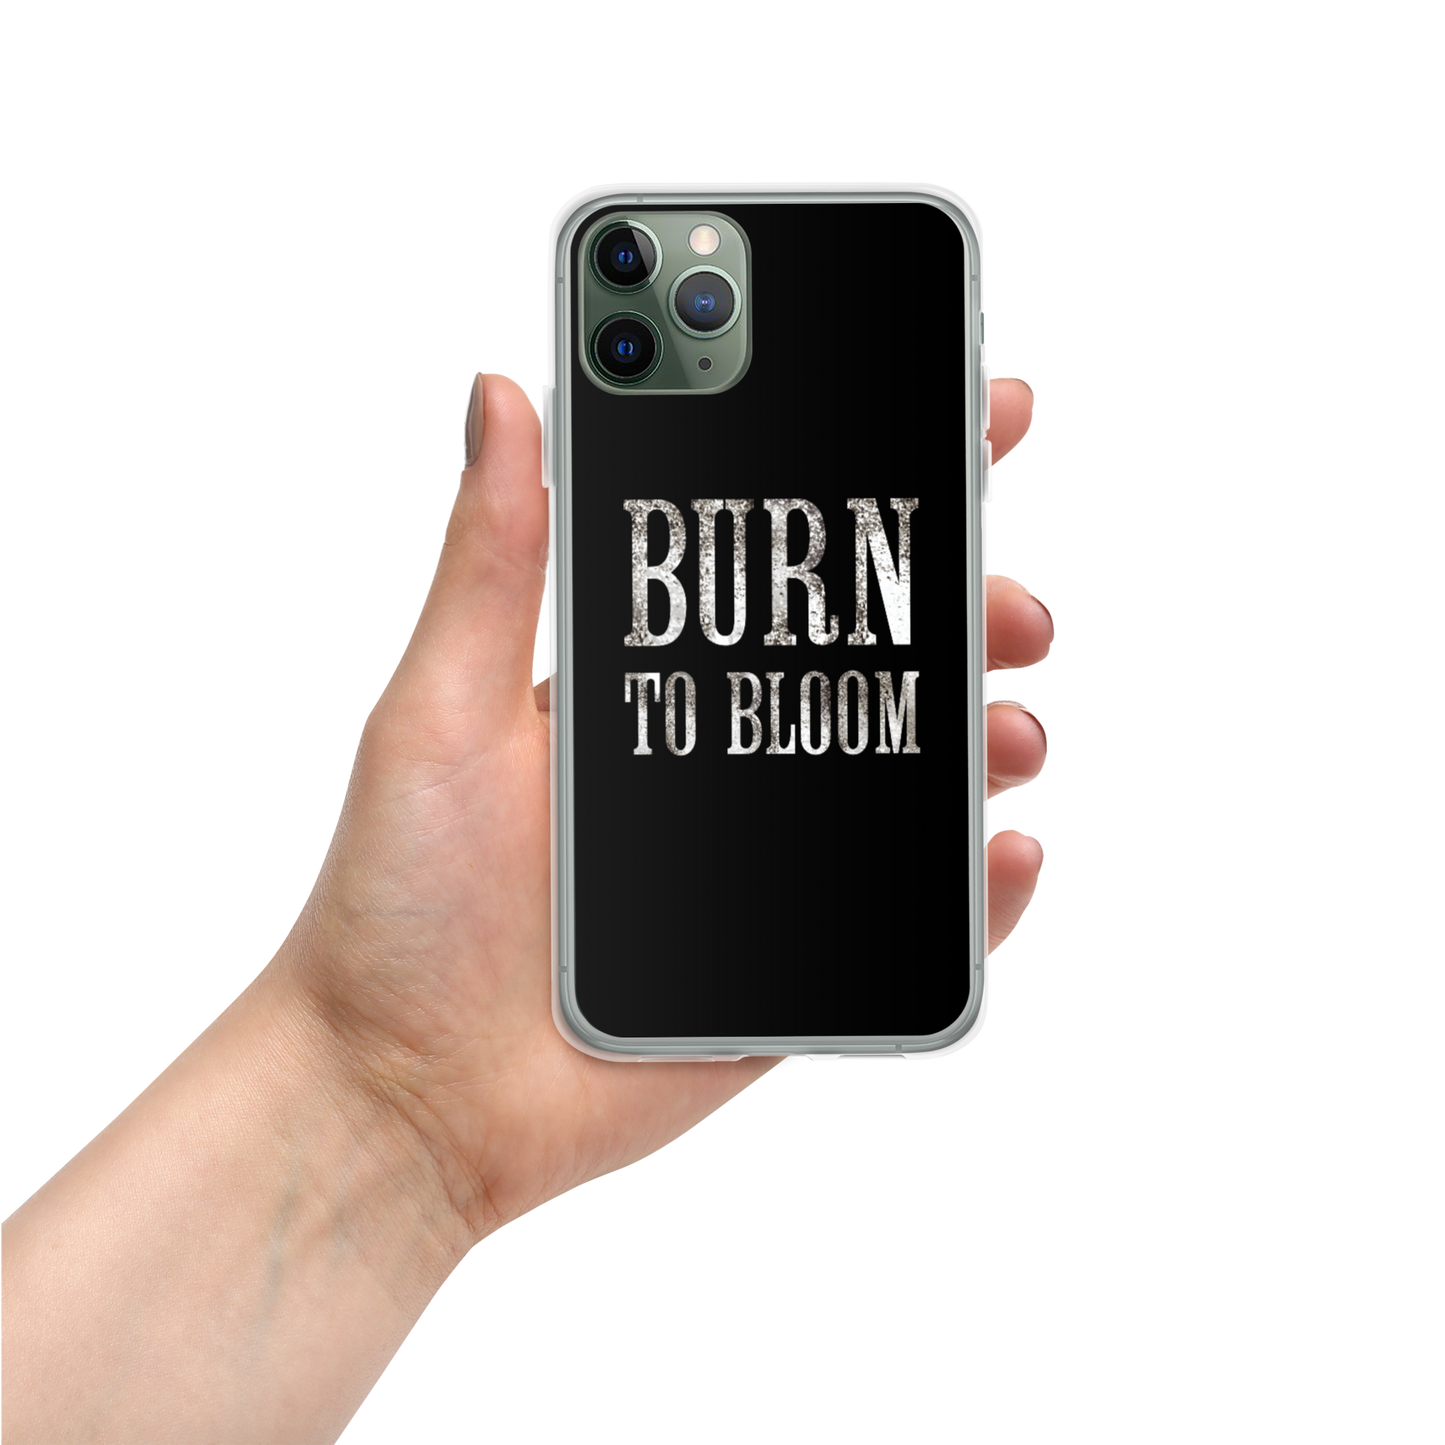 Burn to Bloom - iPhone Case